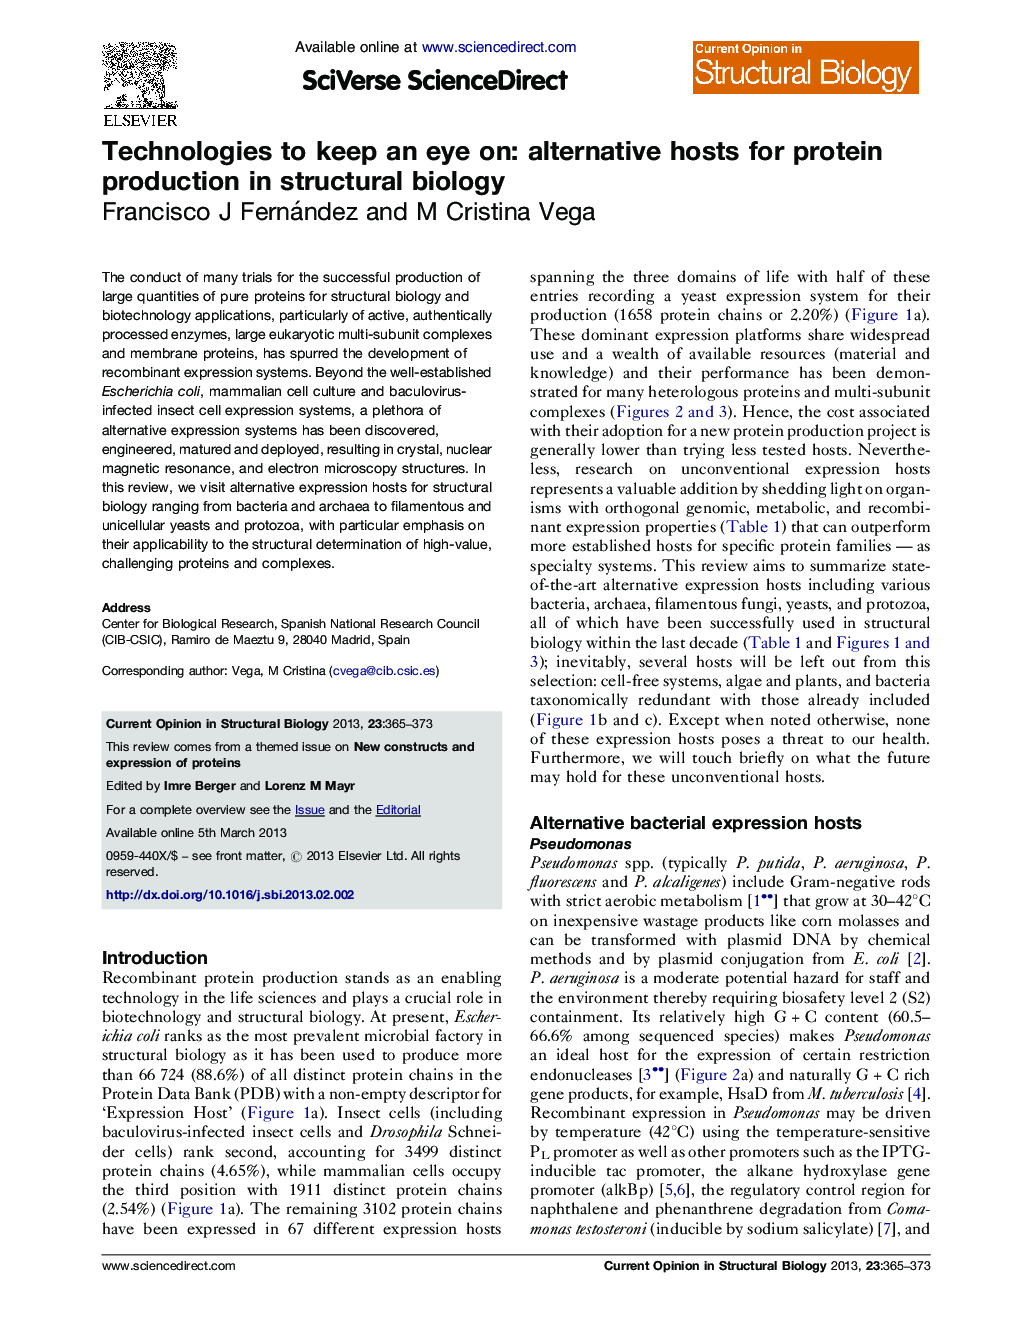 Technologies to keep an eye on: alternative hosts for protein production in structural biology